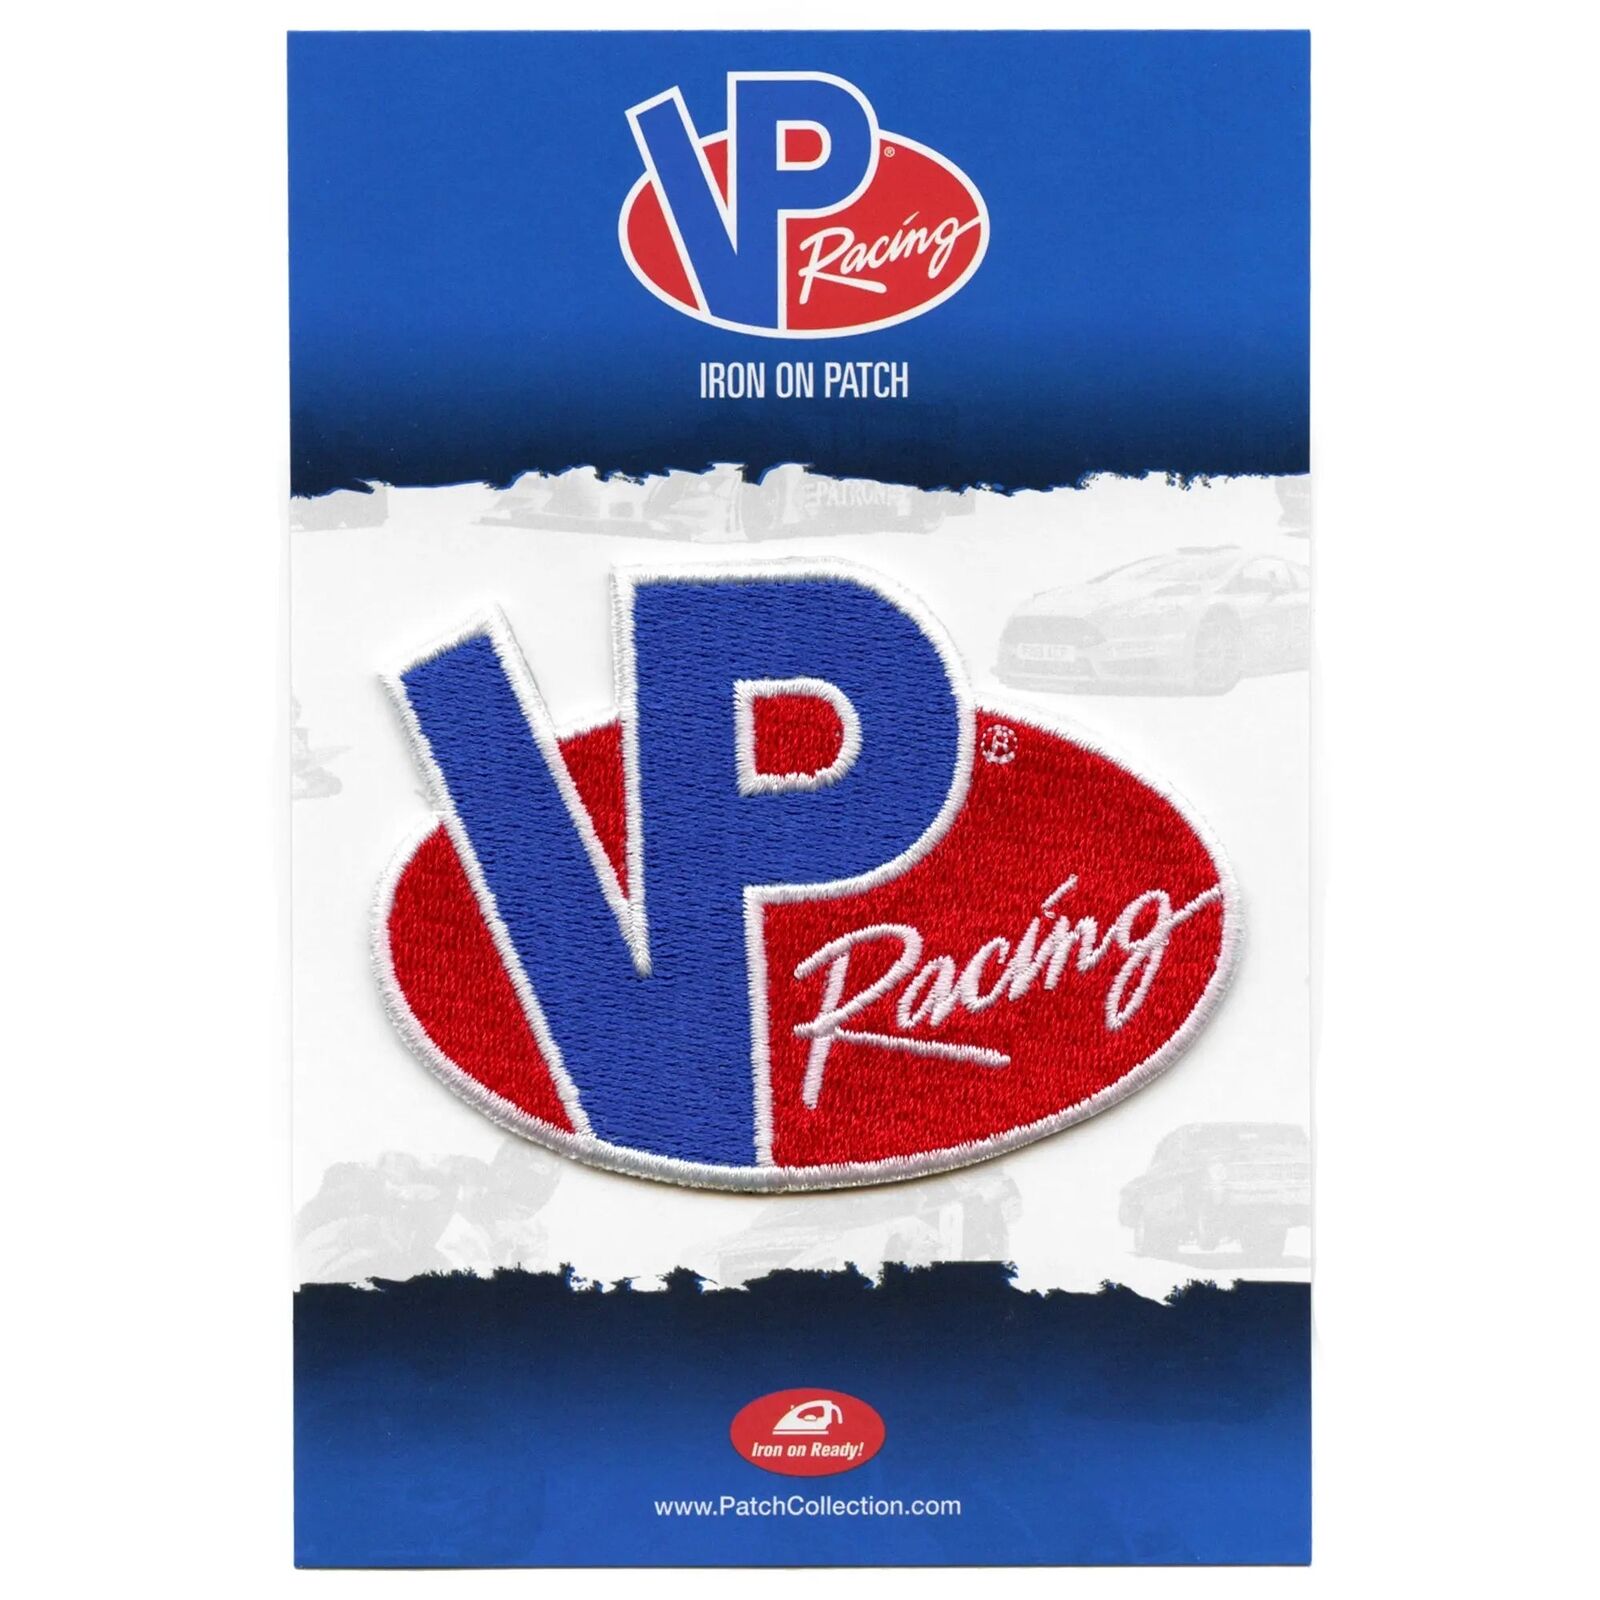 VP Racing Logo Patch Fuel Octane Race Embroidered Iron On